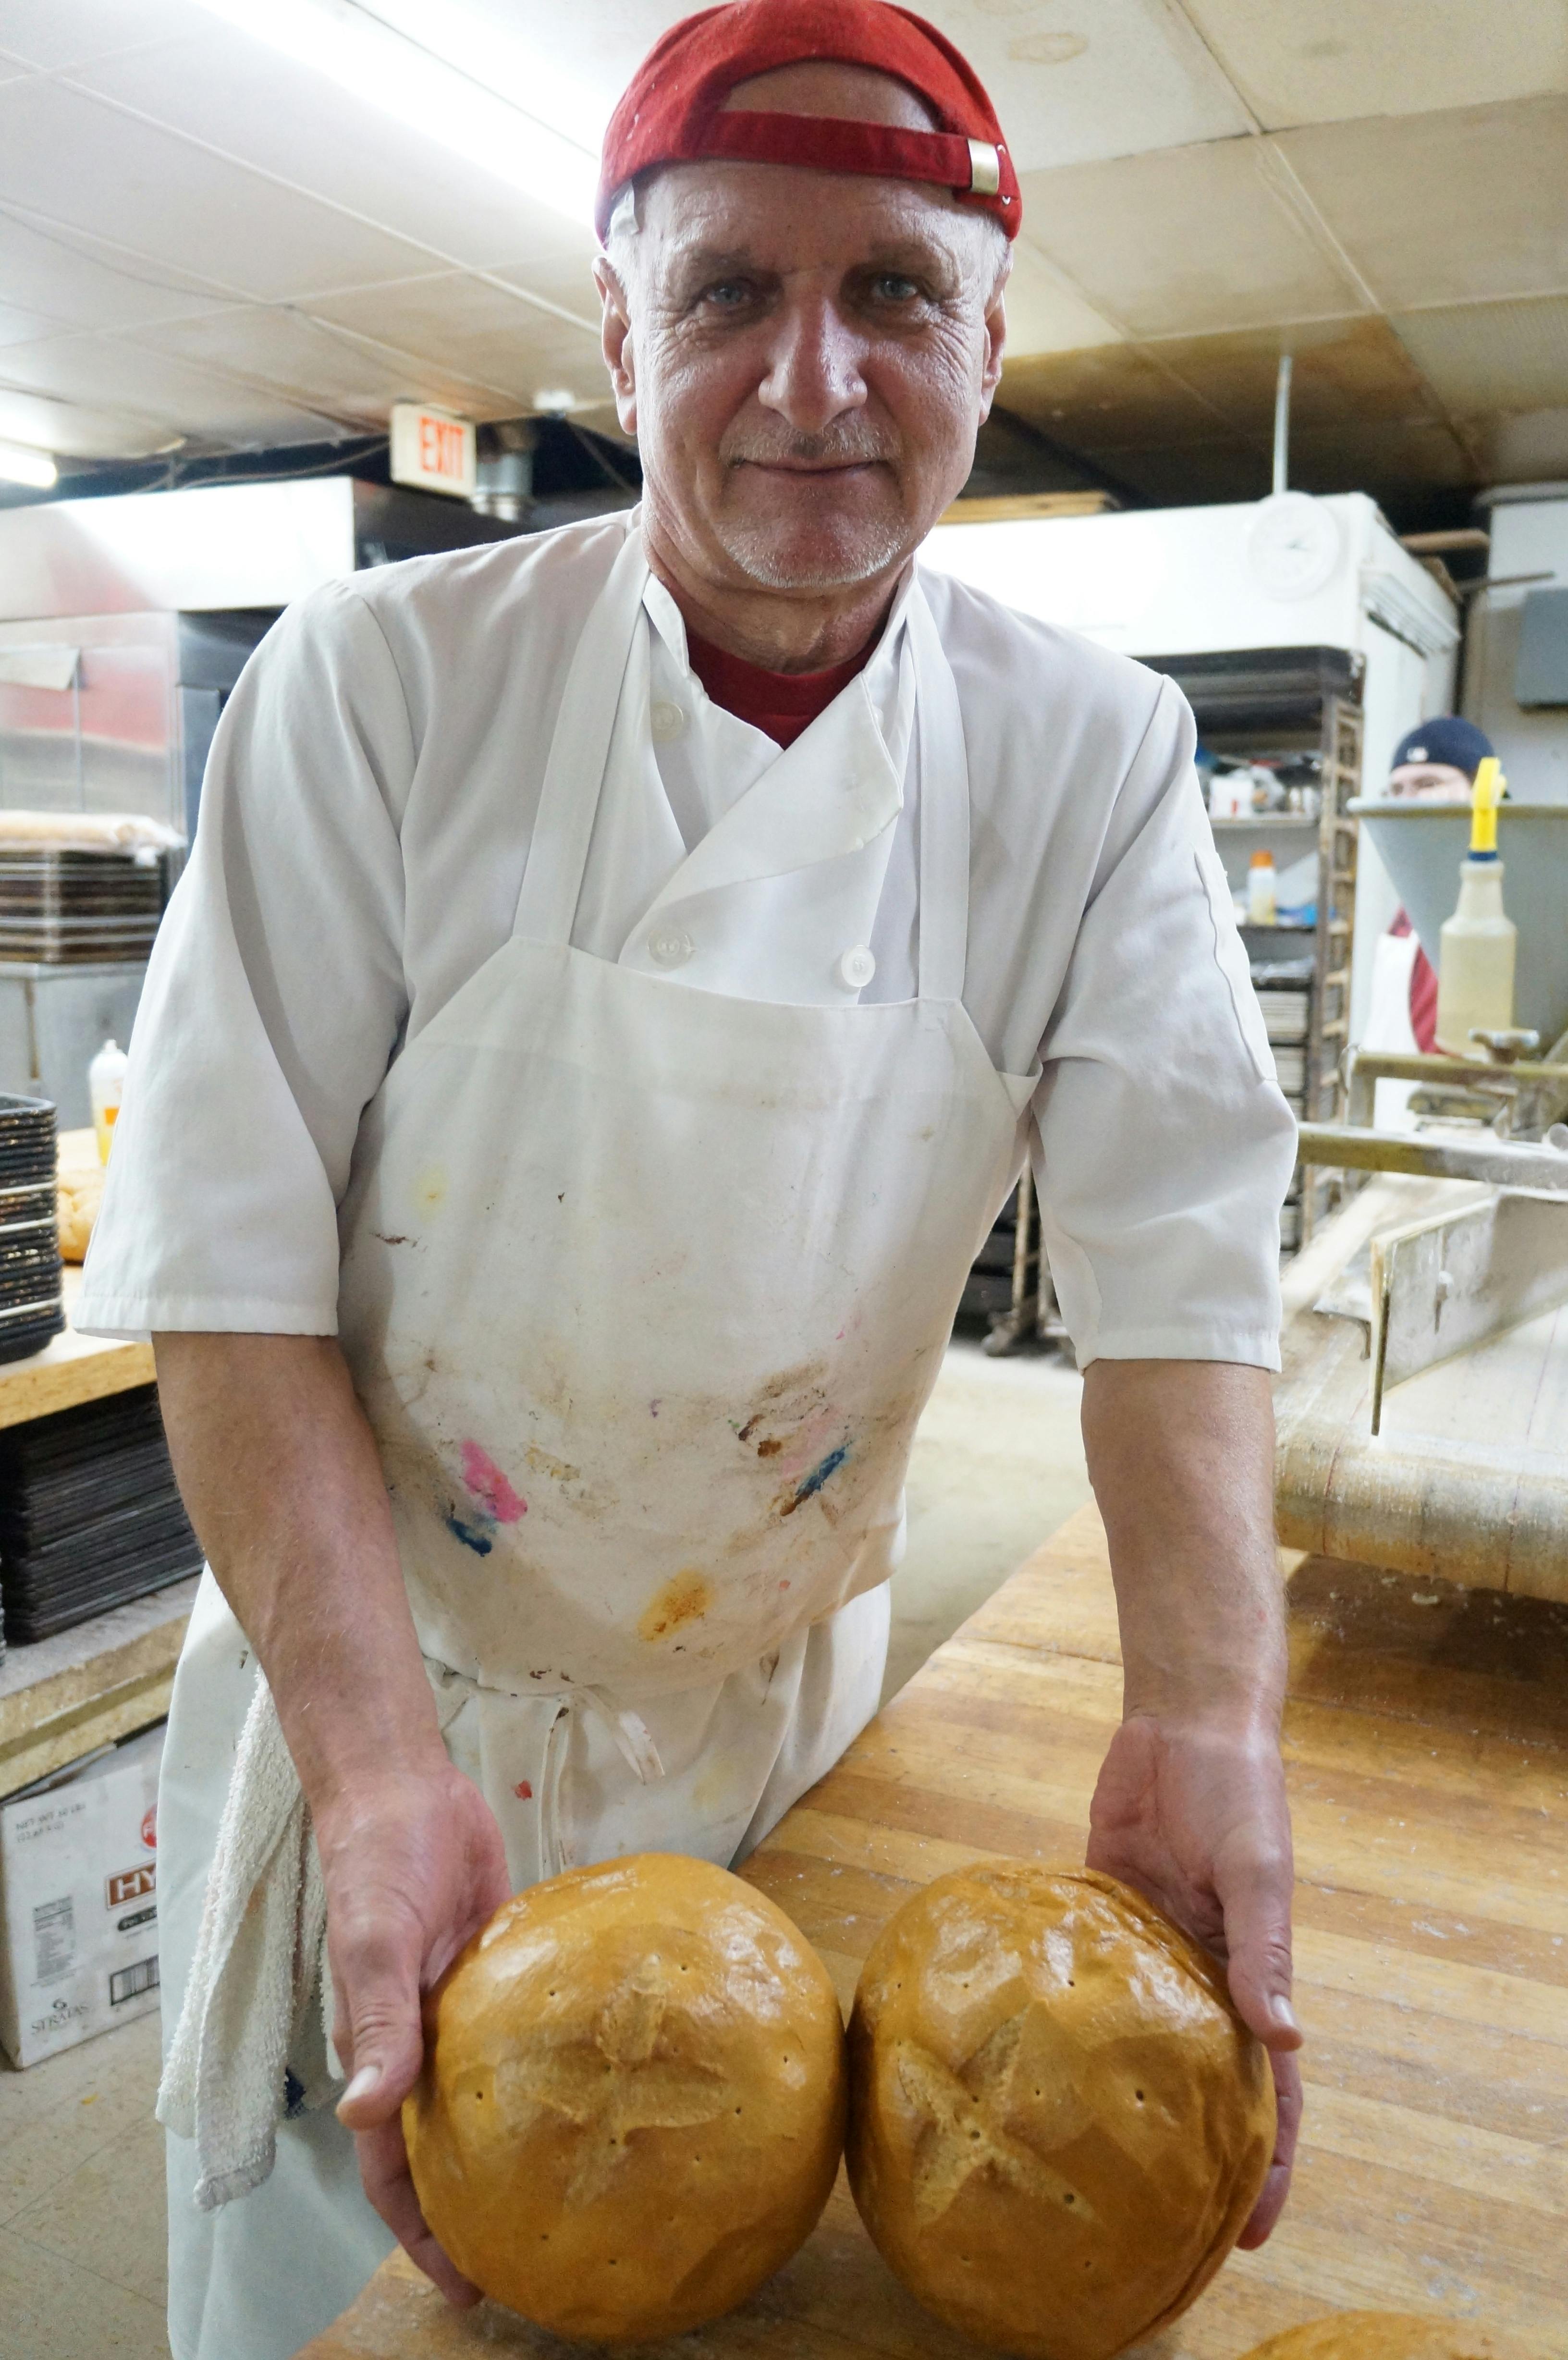 Baker Danny Dimatrivic shows off two bread loaves baked for St. Joseph's feast day. Each ball of dough has a cross carved into the top, the origin of the term "hot cross buns."